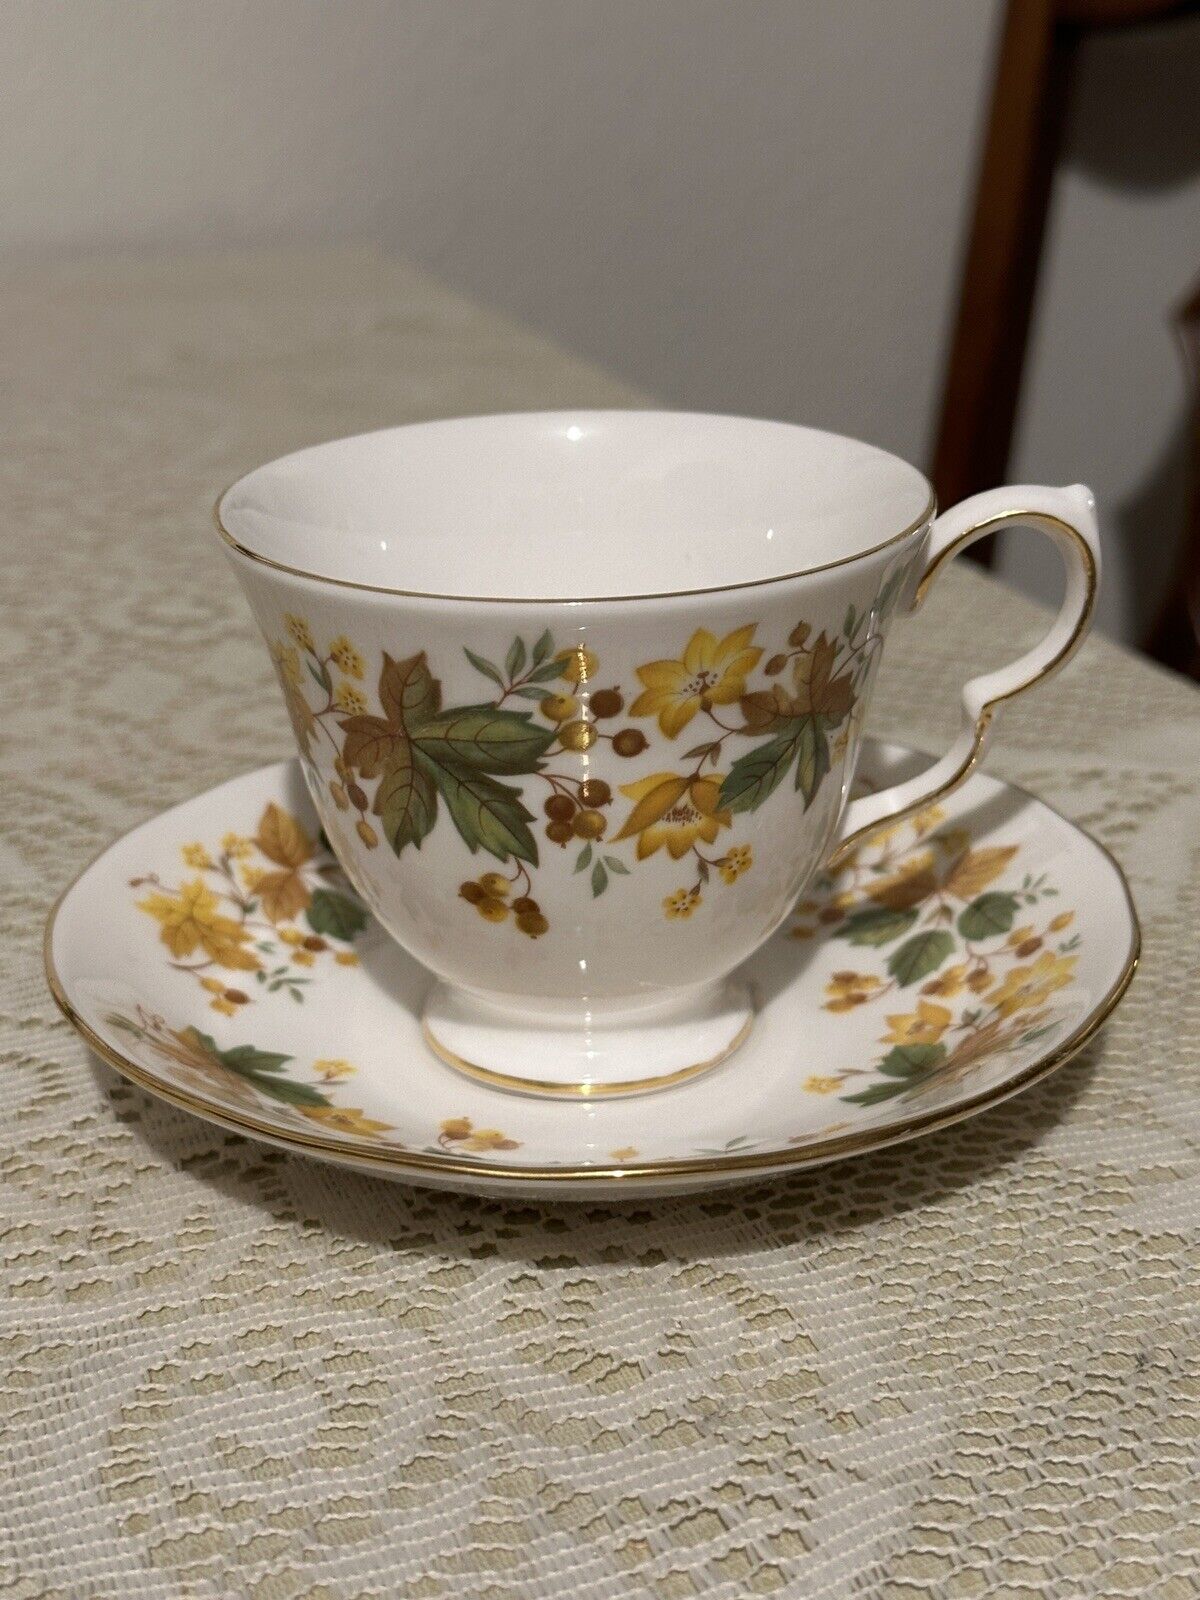 VTG Queen Anne Bone China Teacup and Saucer England Fall Leaves Gold Trim Nice